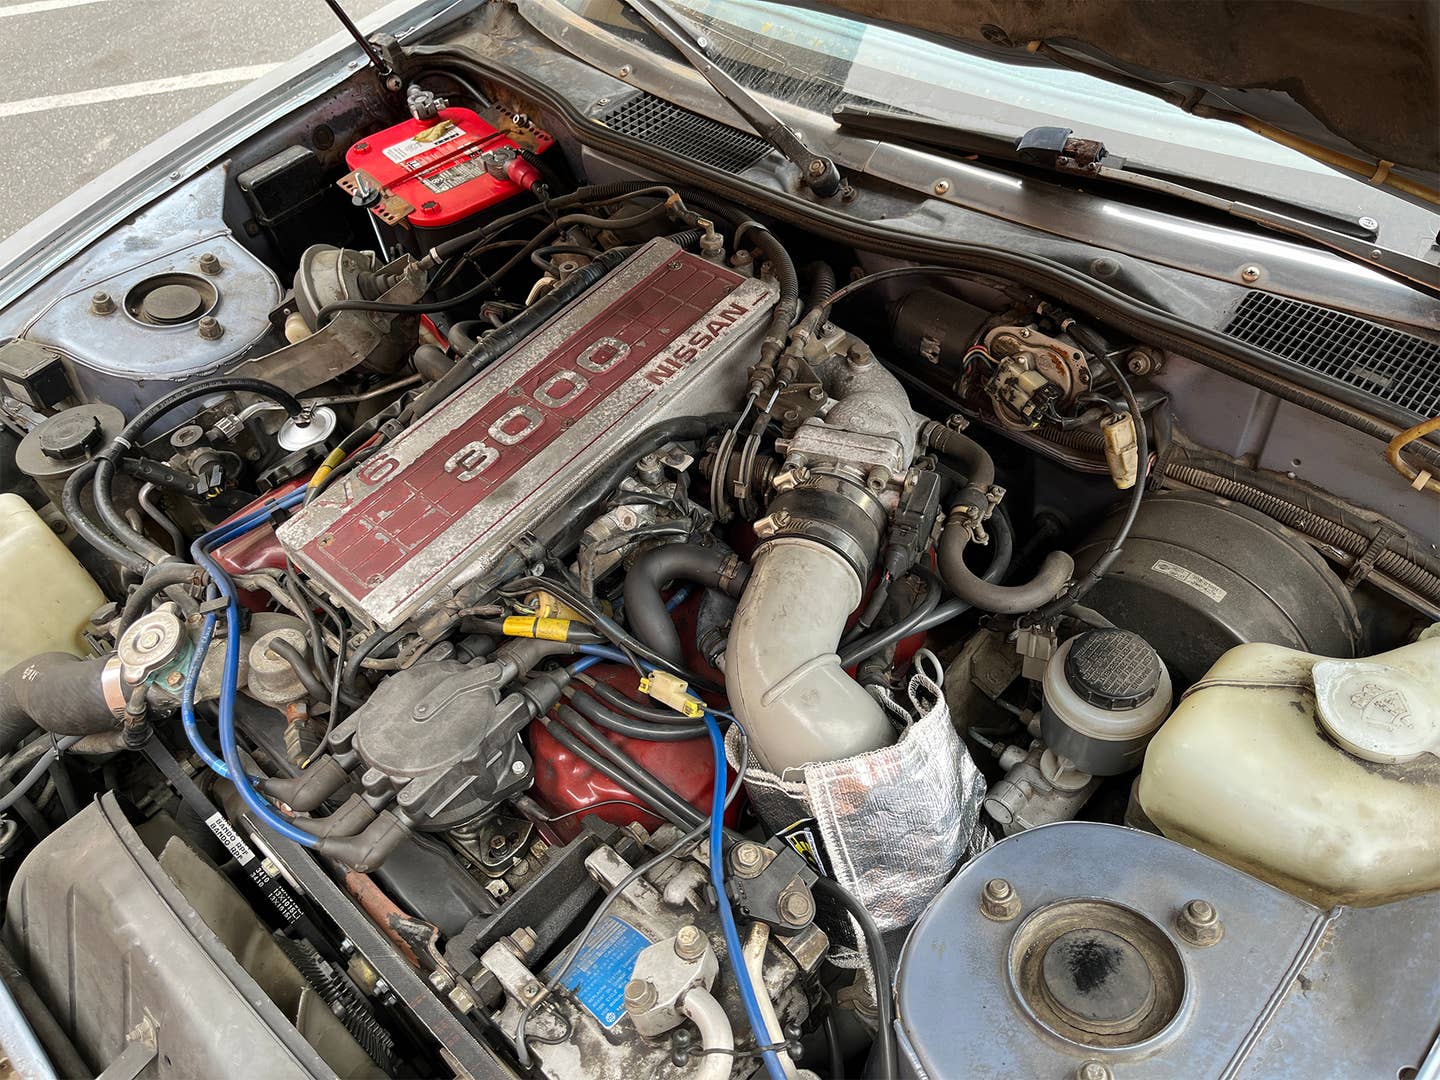 There's my new intake hose all cozy in its heat blanket. The VG is a cool-looking engine, isn't it? <em>Andrew P. Collins</em>